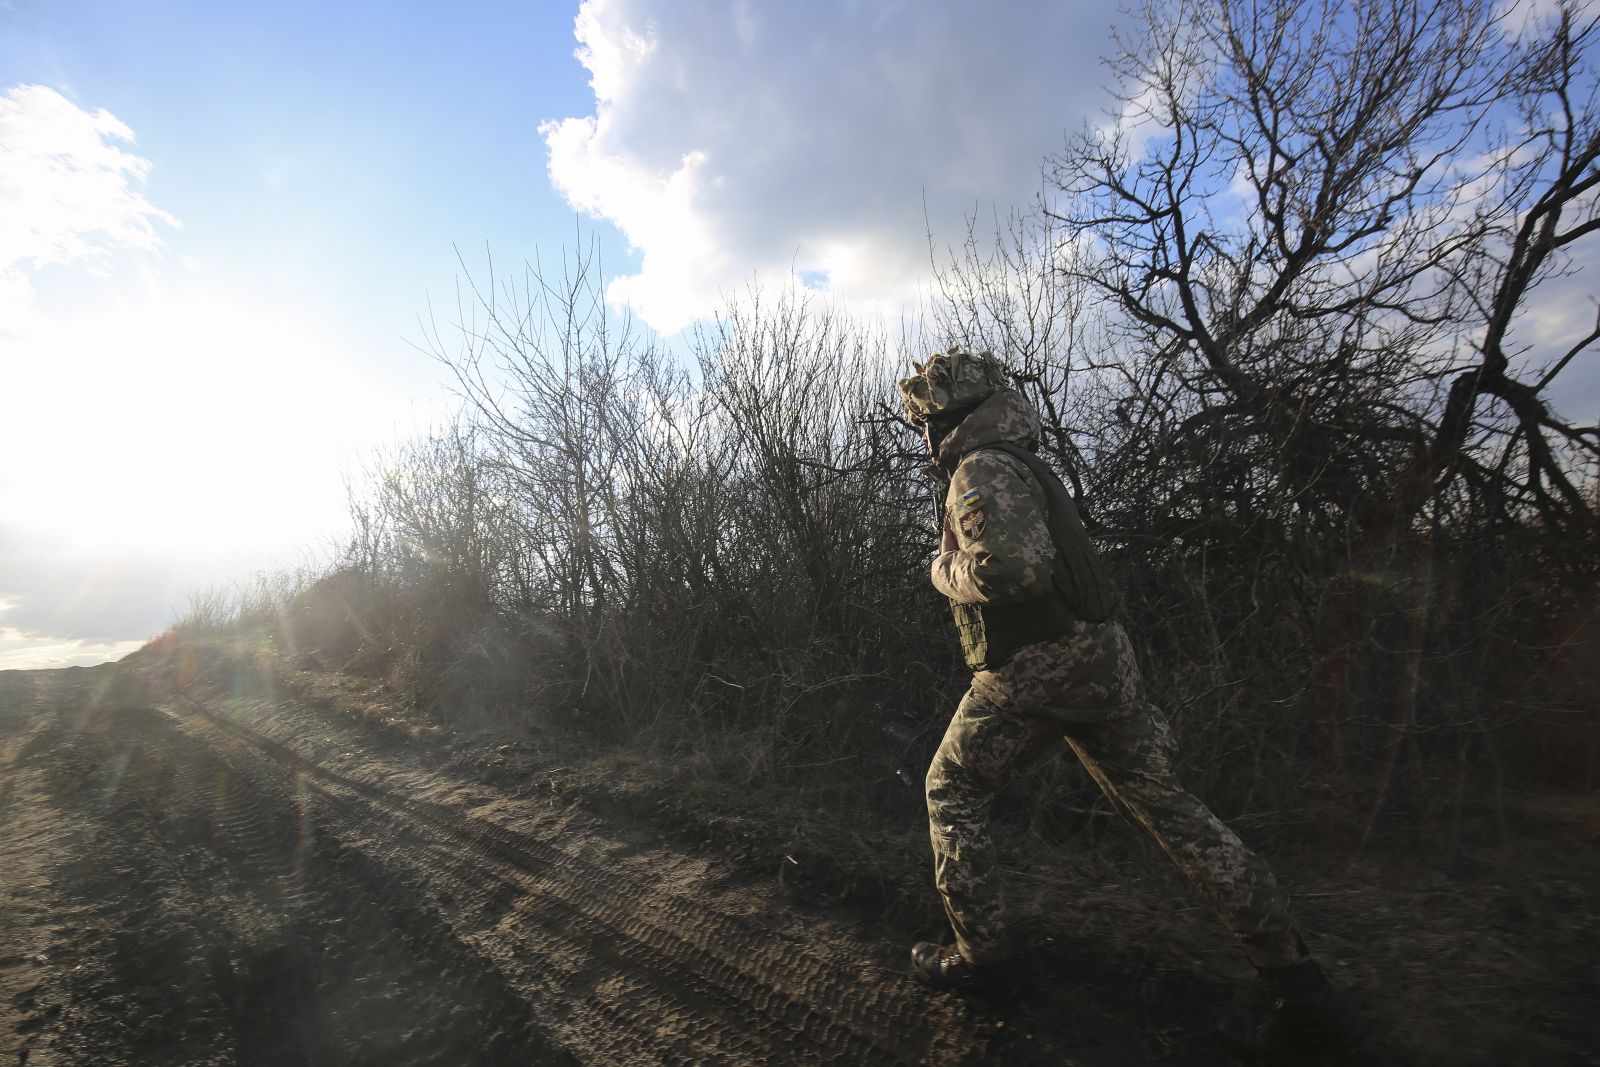 epa09777436 An Ukranian serviceman checks situation on the position near the Zaytseve village not far from pro-Russian militants controlled city of Gorlivka Donetsk area, Ukraine, 21 February 2022 (made available 22 February). Russia on 21 February 2022 recognized the eastern Ukrainian self-proclaimed breakaway regions as independent states and ordered the deployment of peacekeeping troops to the Donbas, triggering an expected series of economic sanctions announcements by Western countries. The self-proclaimed Donetsk People's Republic (DNR) and Luhansk People's Republic (LNR) declared independence in 2014 amid an armed conflict in eastern Ukraine.  EPA/ALISA YAKUBOVYCH